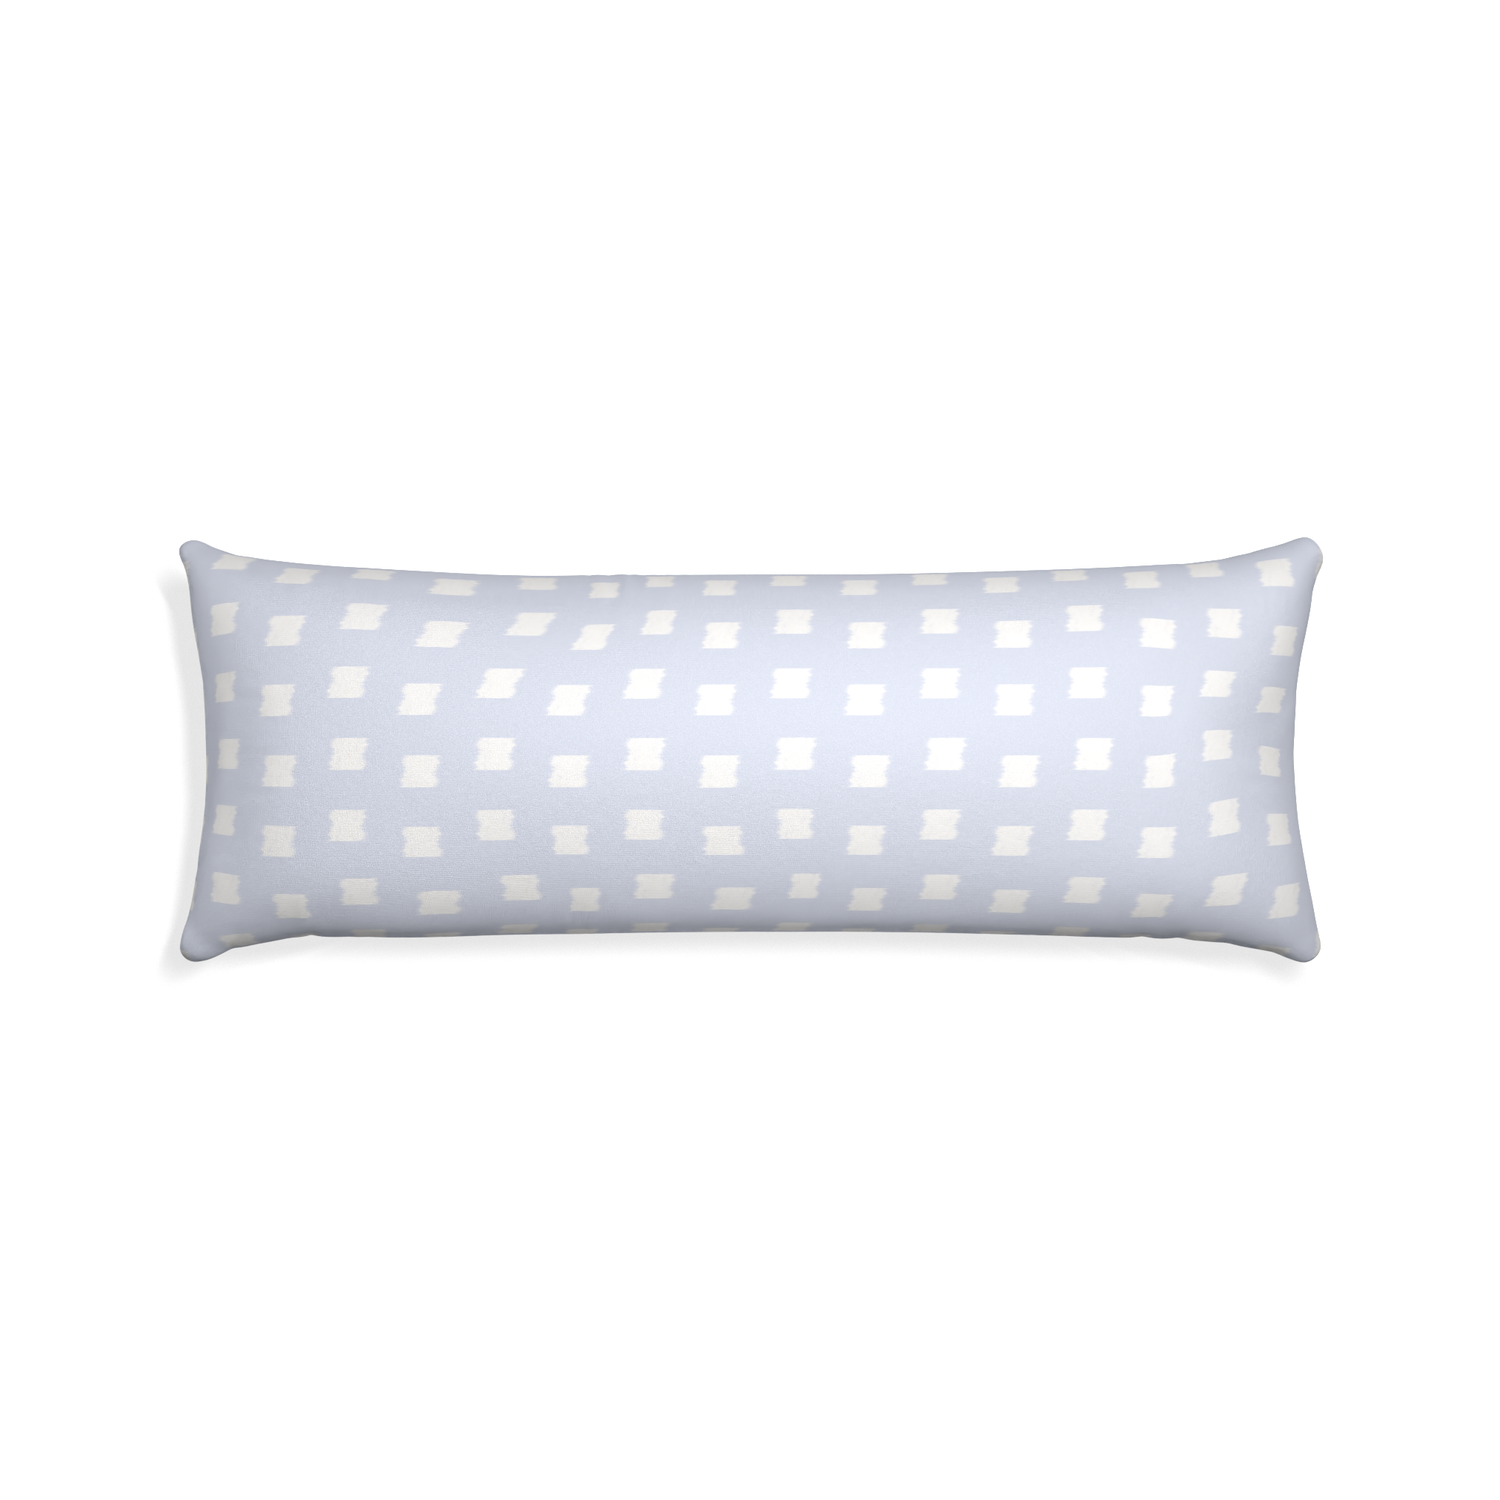 Xl-lumbar denton custom sky blue patternpillow with none on white background